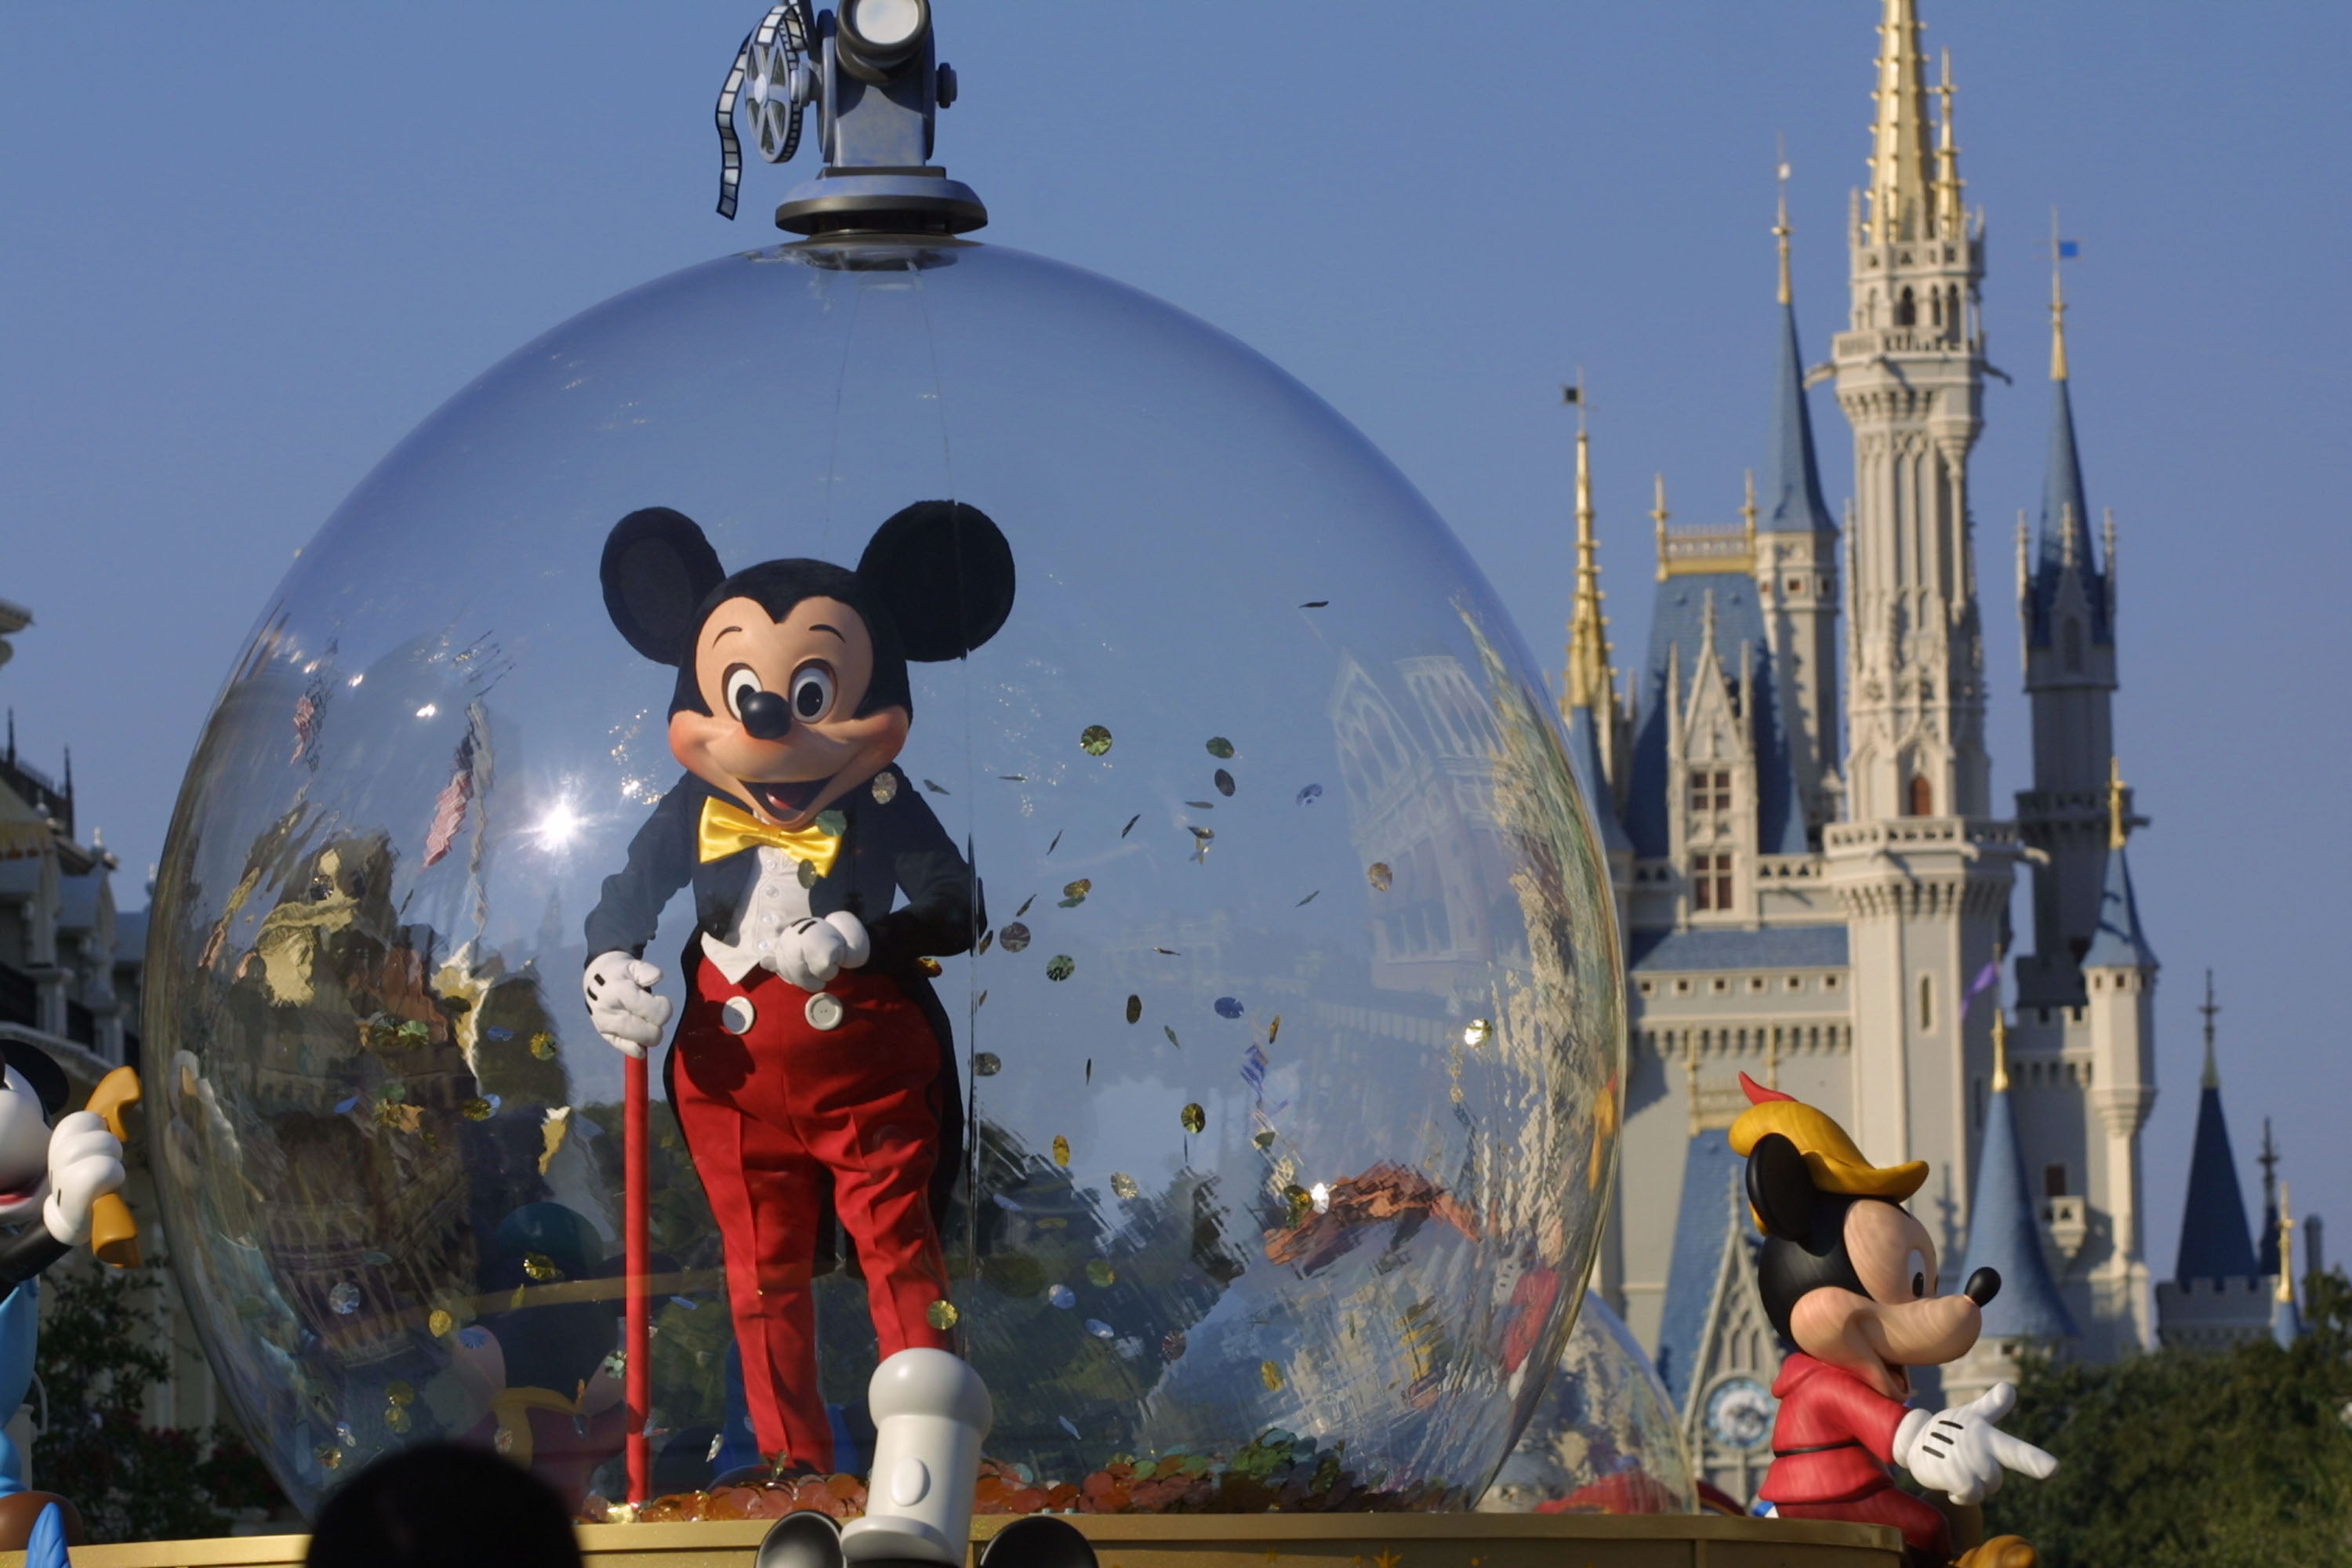 Disney is the world’s largest theme park operator